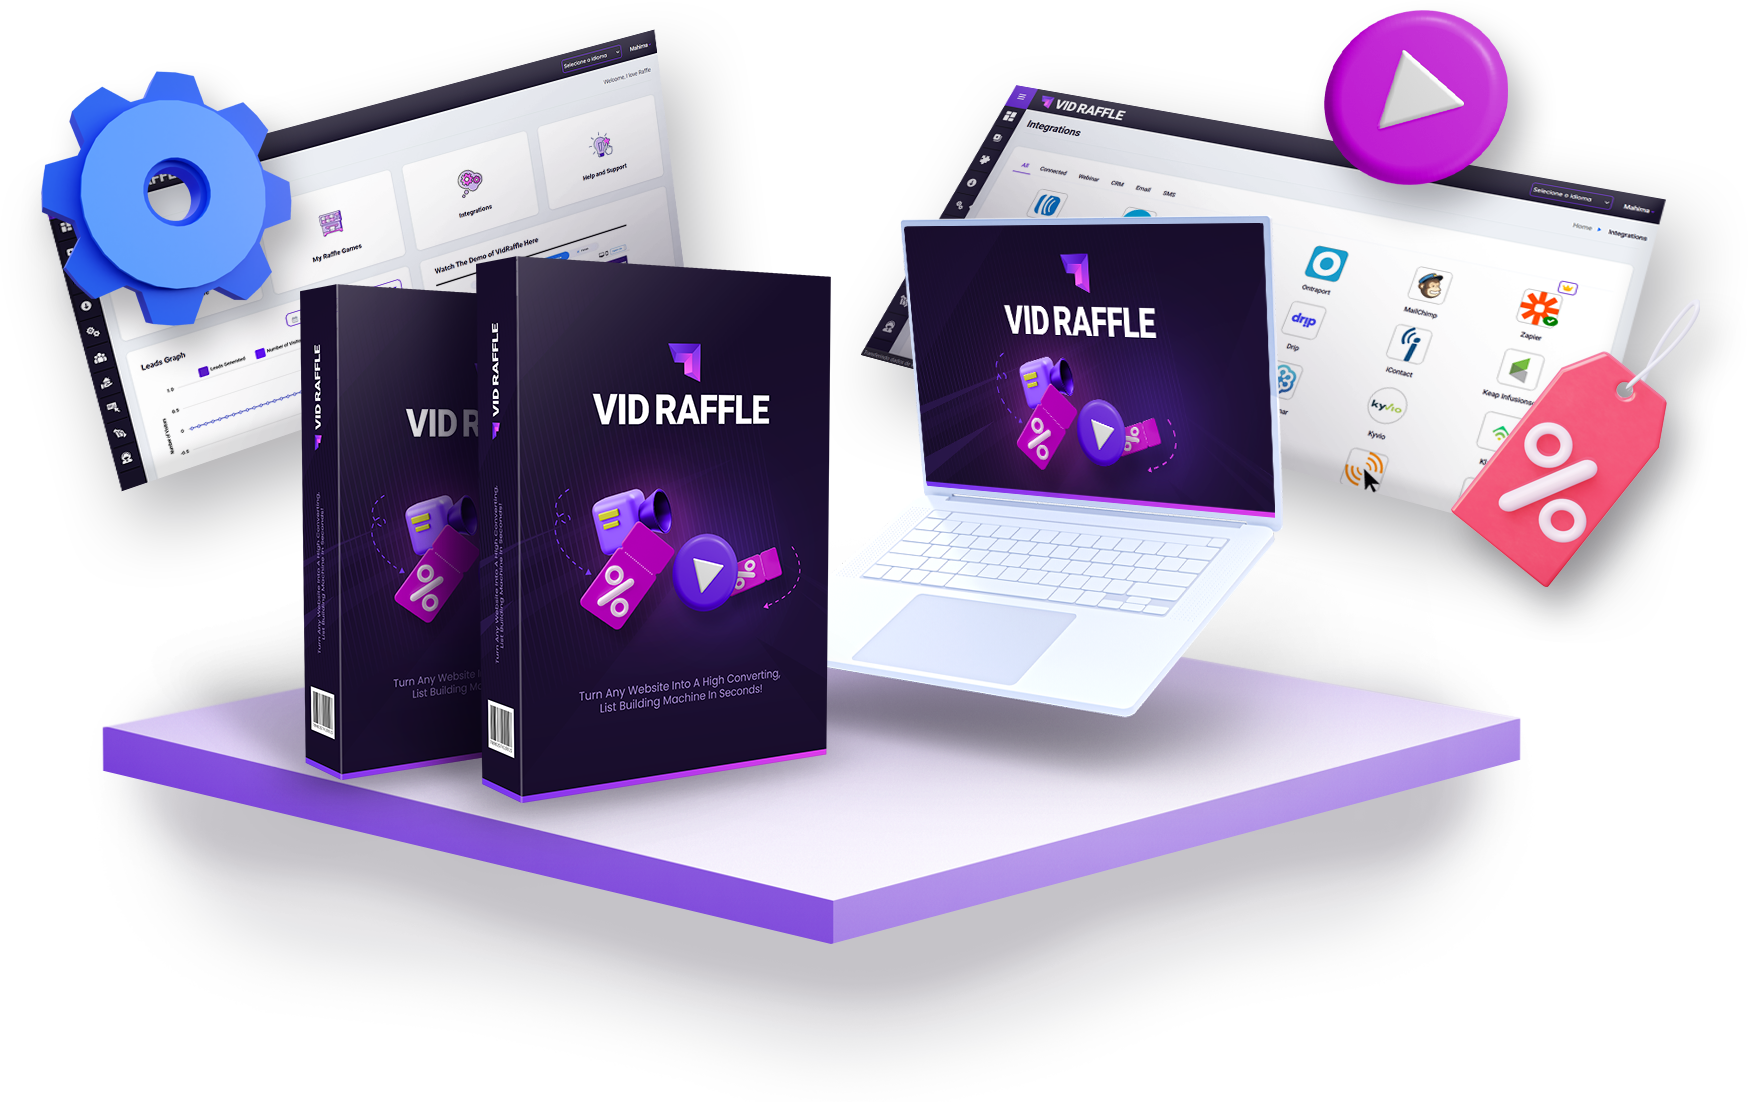 VidRaffle Reloaded Review – Best #1 Video Raffle App Turns Any Website Into A High Converting, List Building Machine In Seconds! VidRaffle Uses Gamification To Turn Dying Email Optin Forms Into Exciting Raffles That People Can’t Resist And Builds Your List Faster Than Ever!